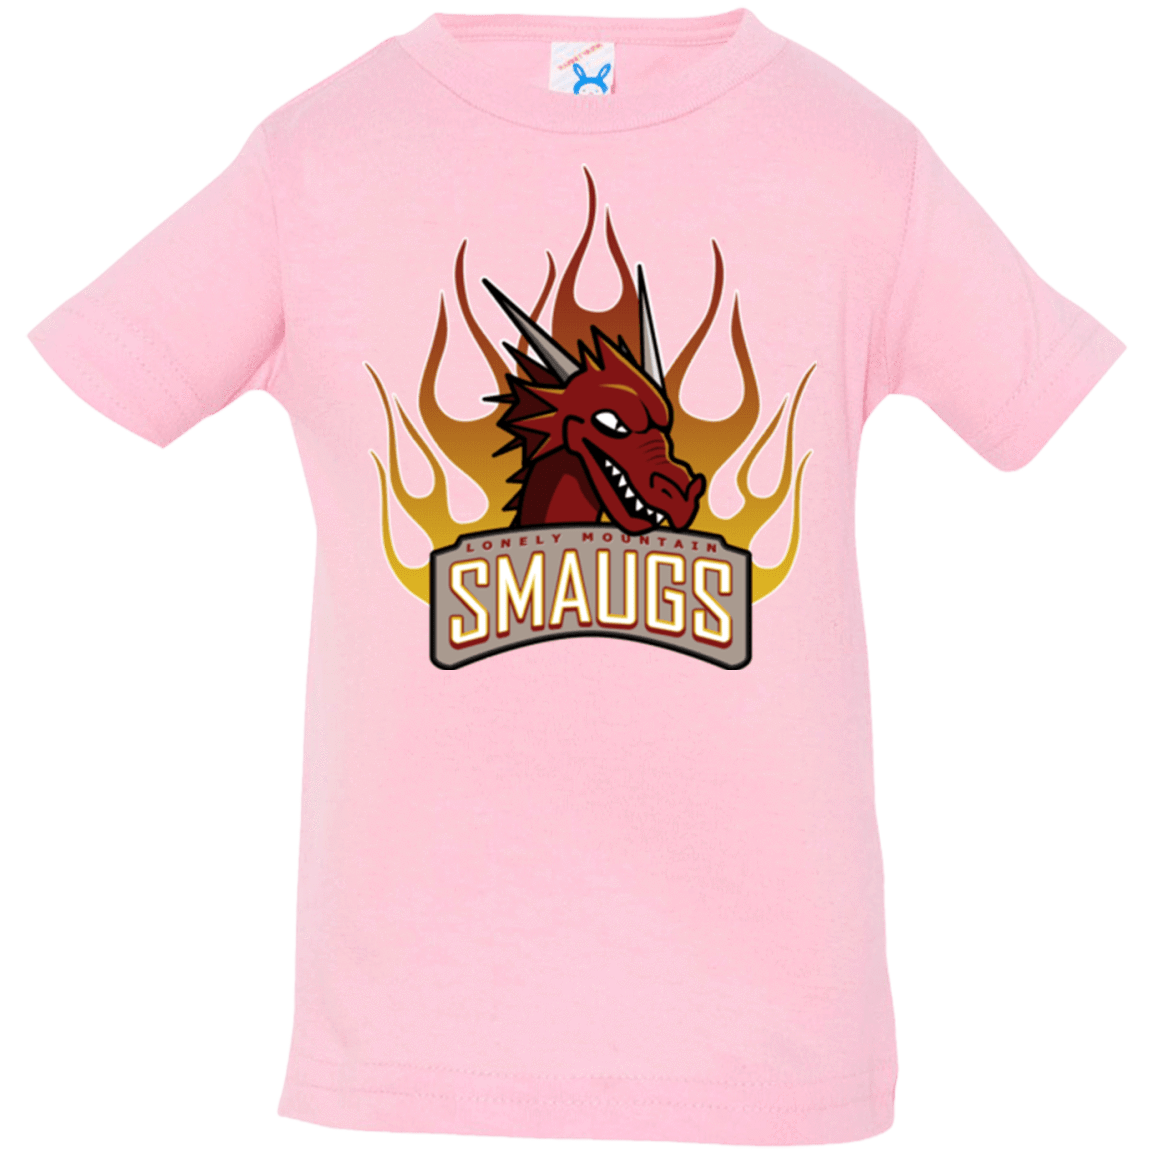 T-Shirts Pink / 6 Months Smaugs Infant PremiumT-Shirt